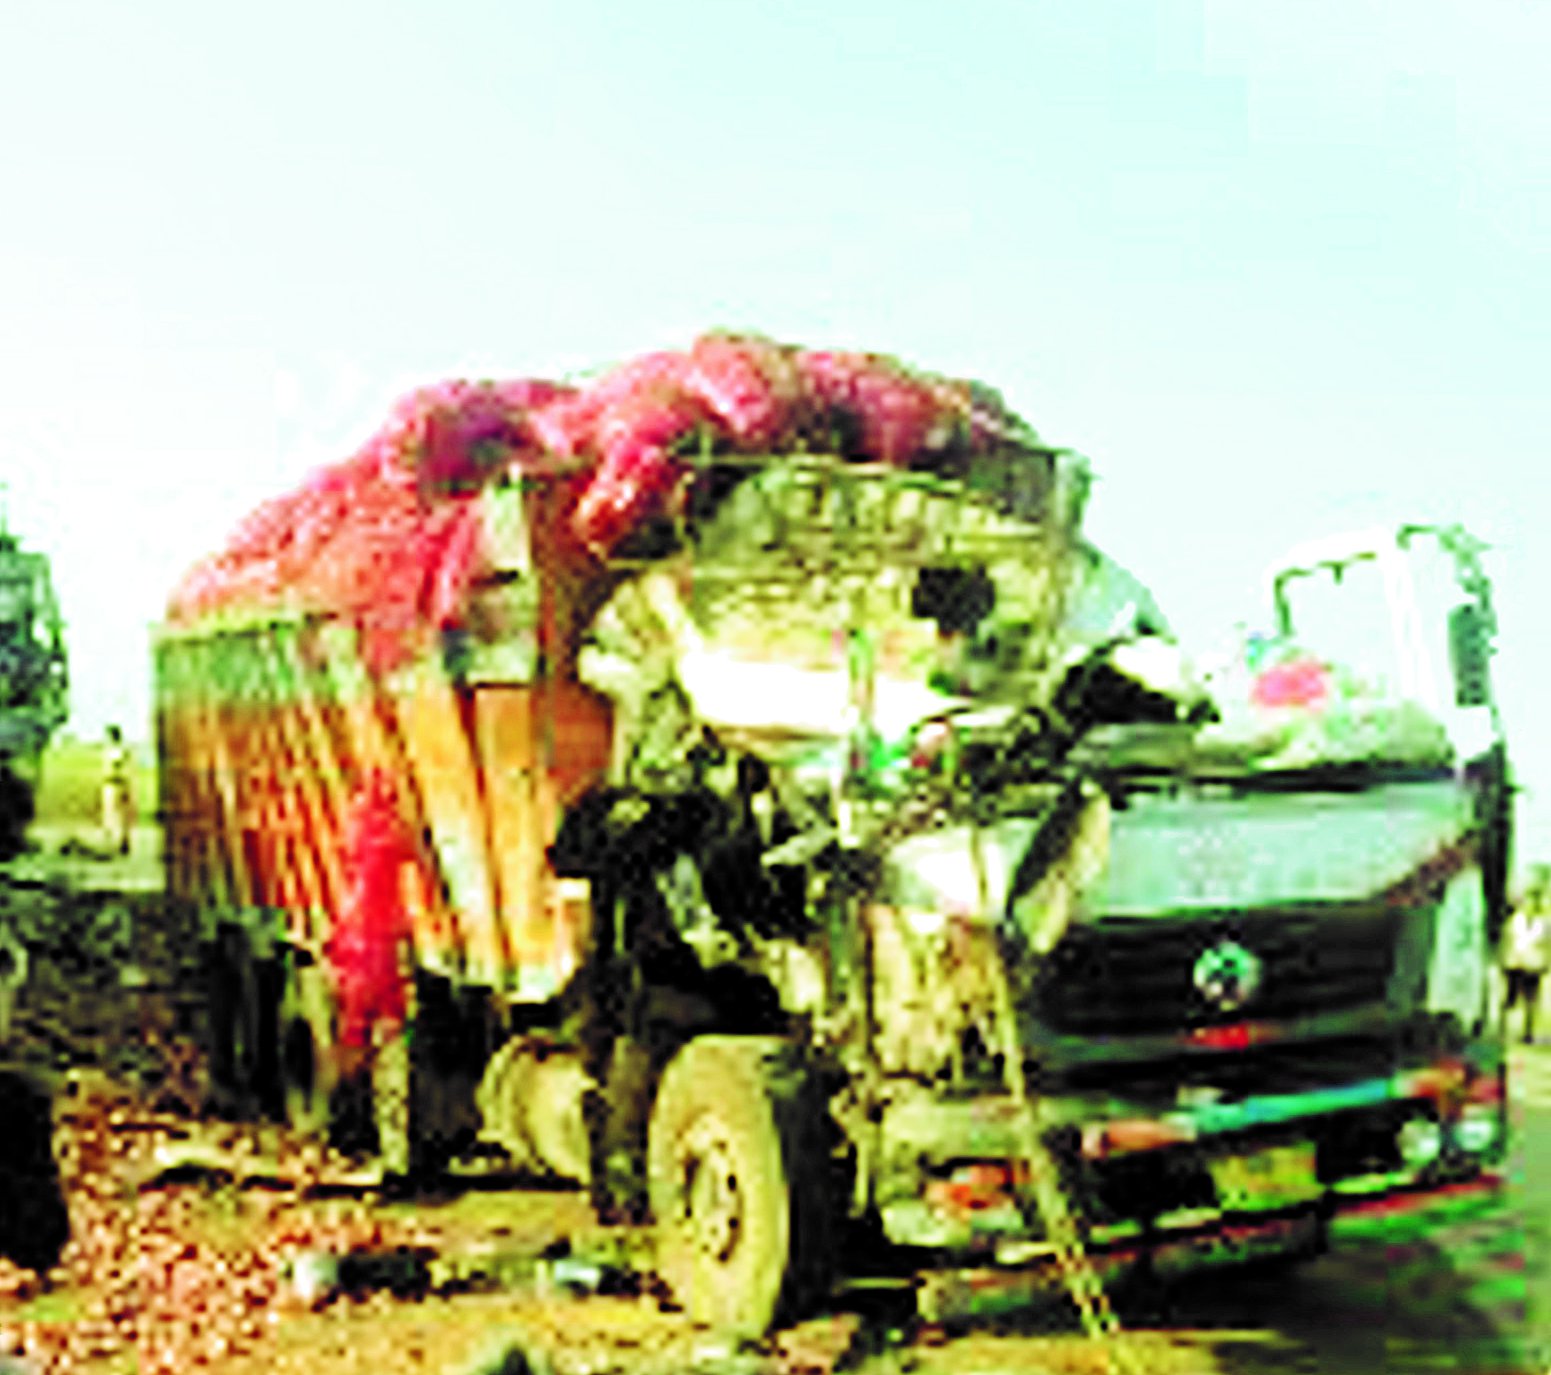 Truck driver dies in road accident